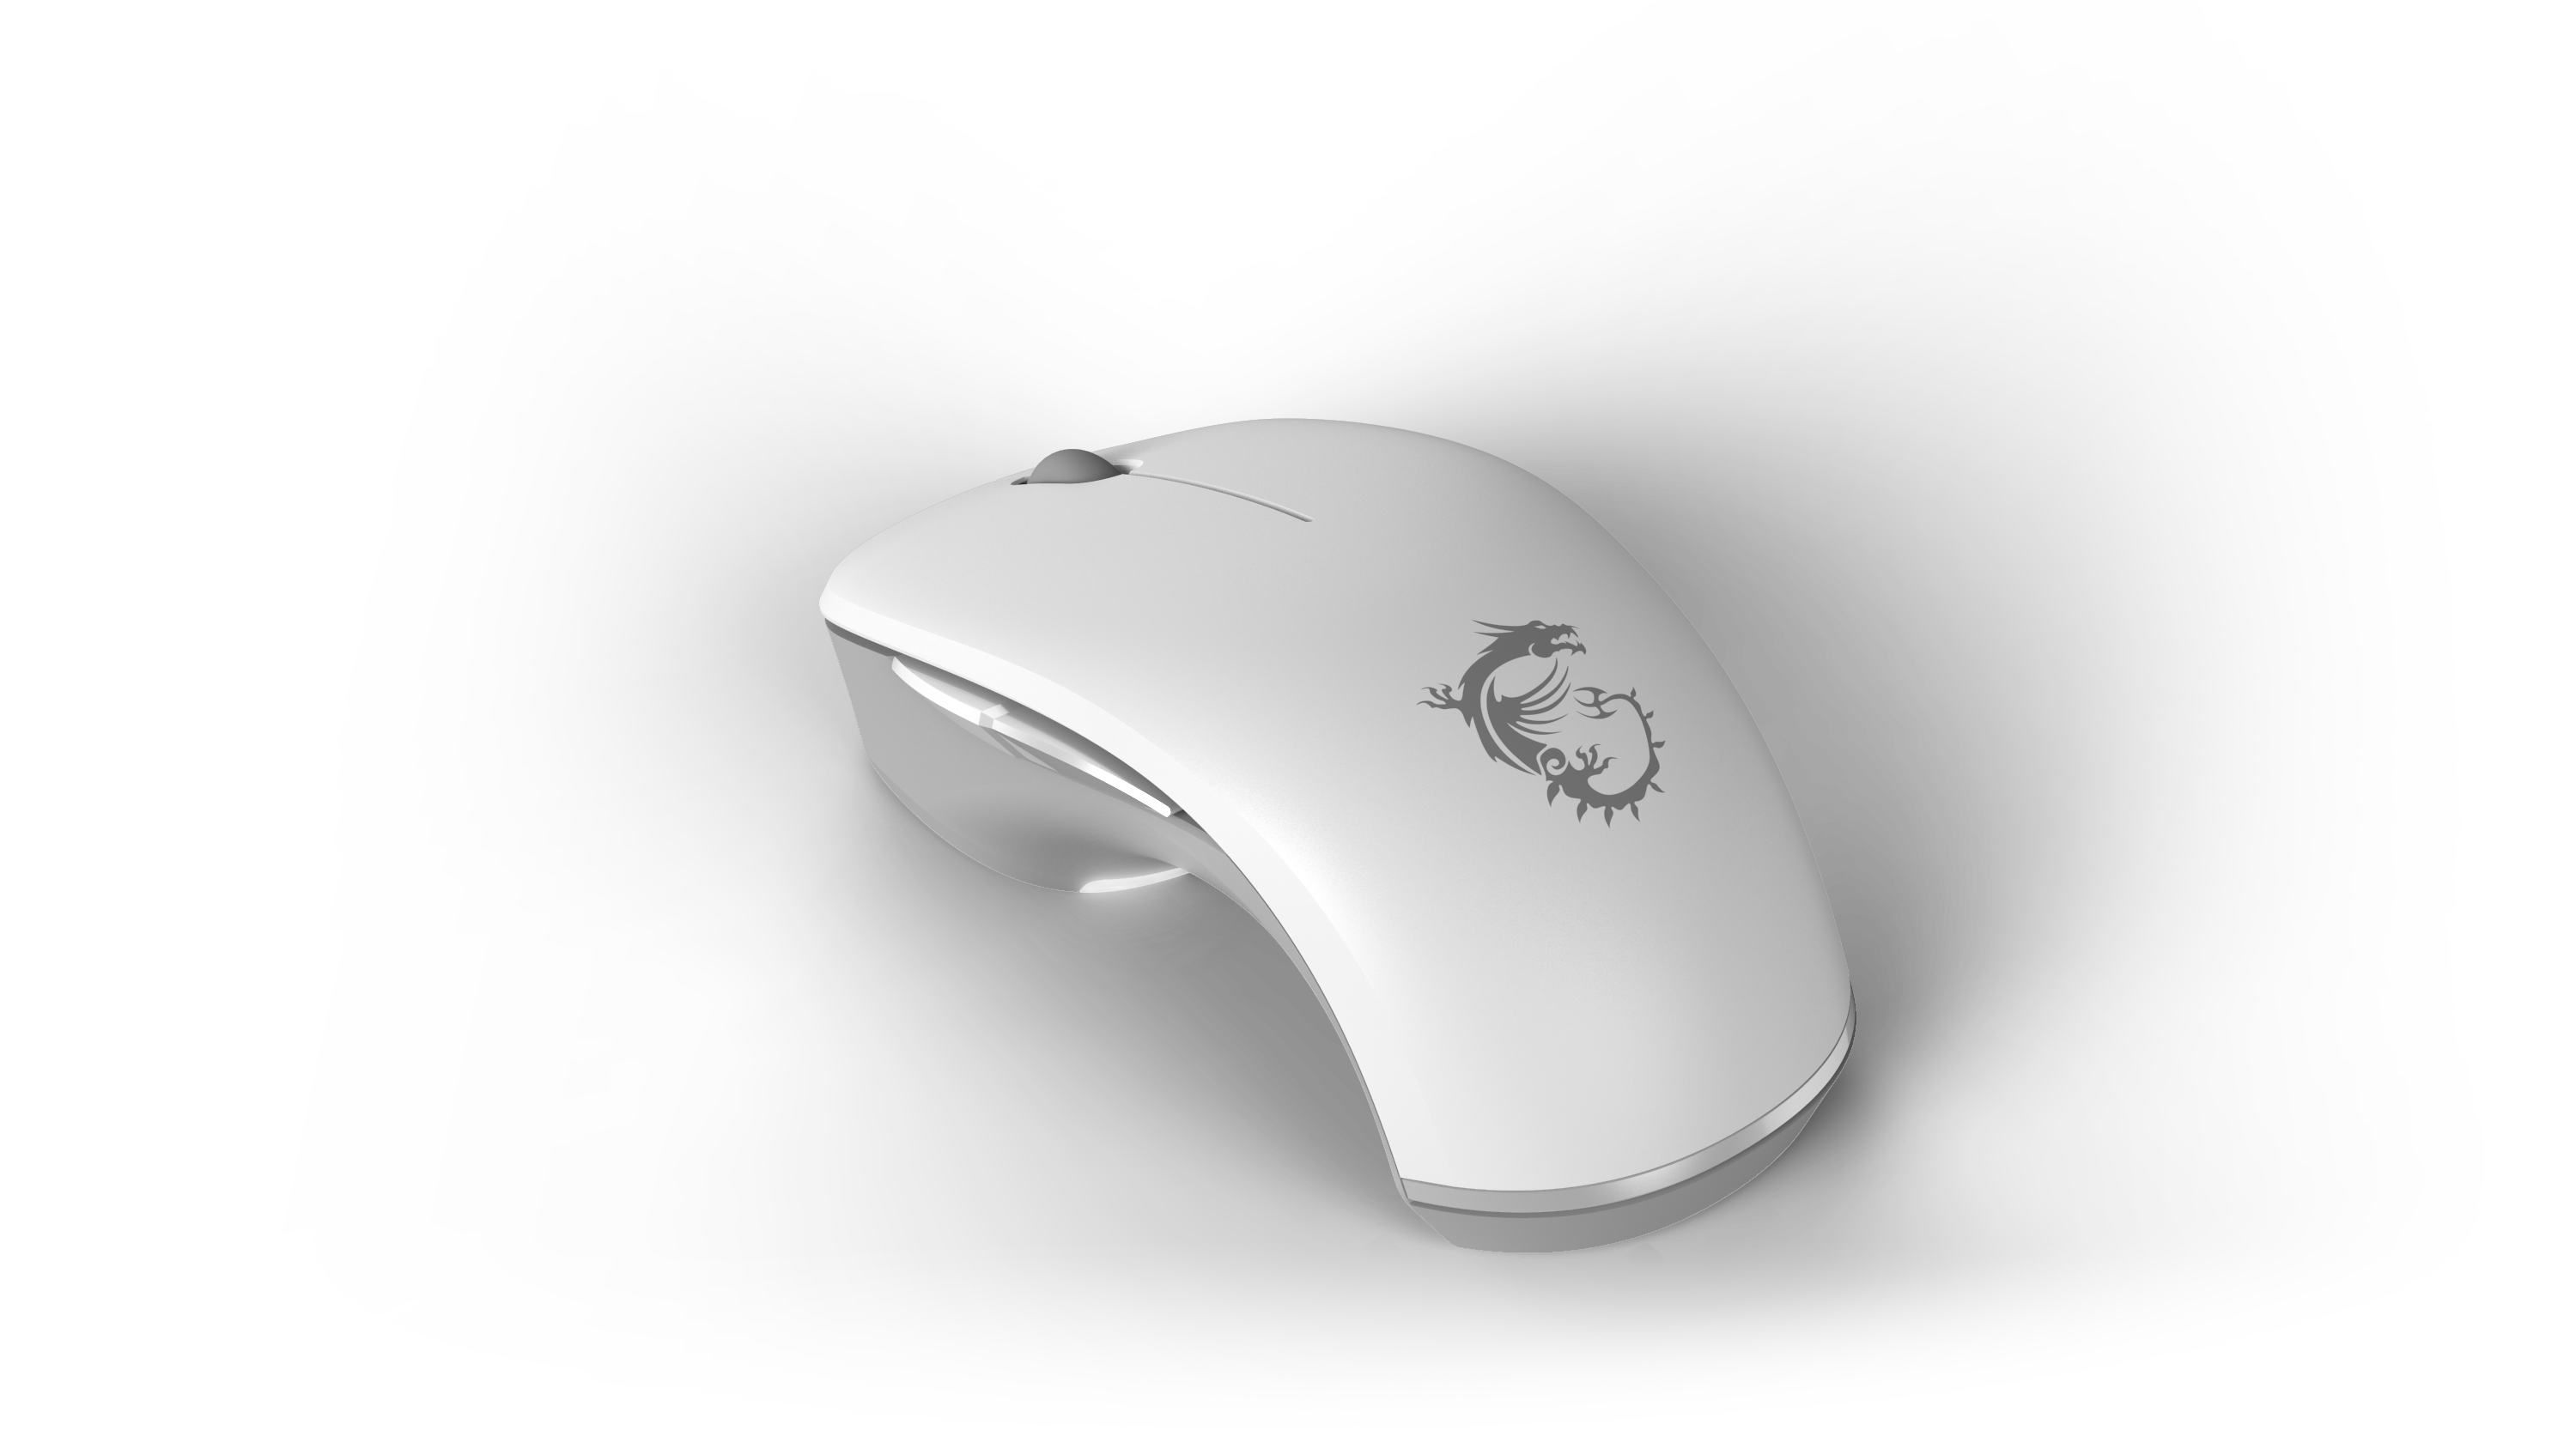 MSI CES 2020 Creation CM30 Mouse Product Image